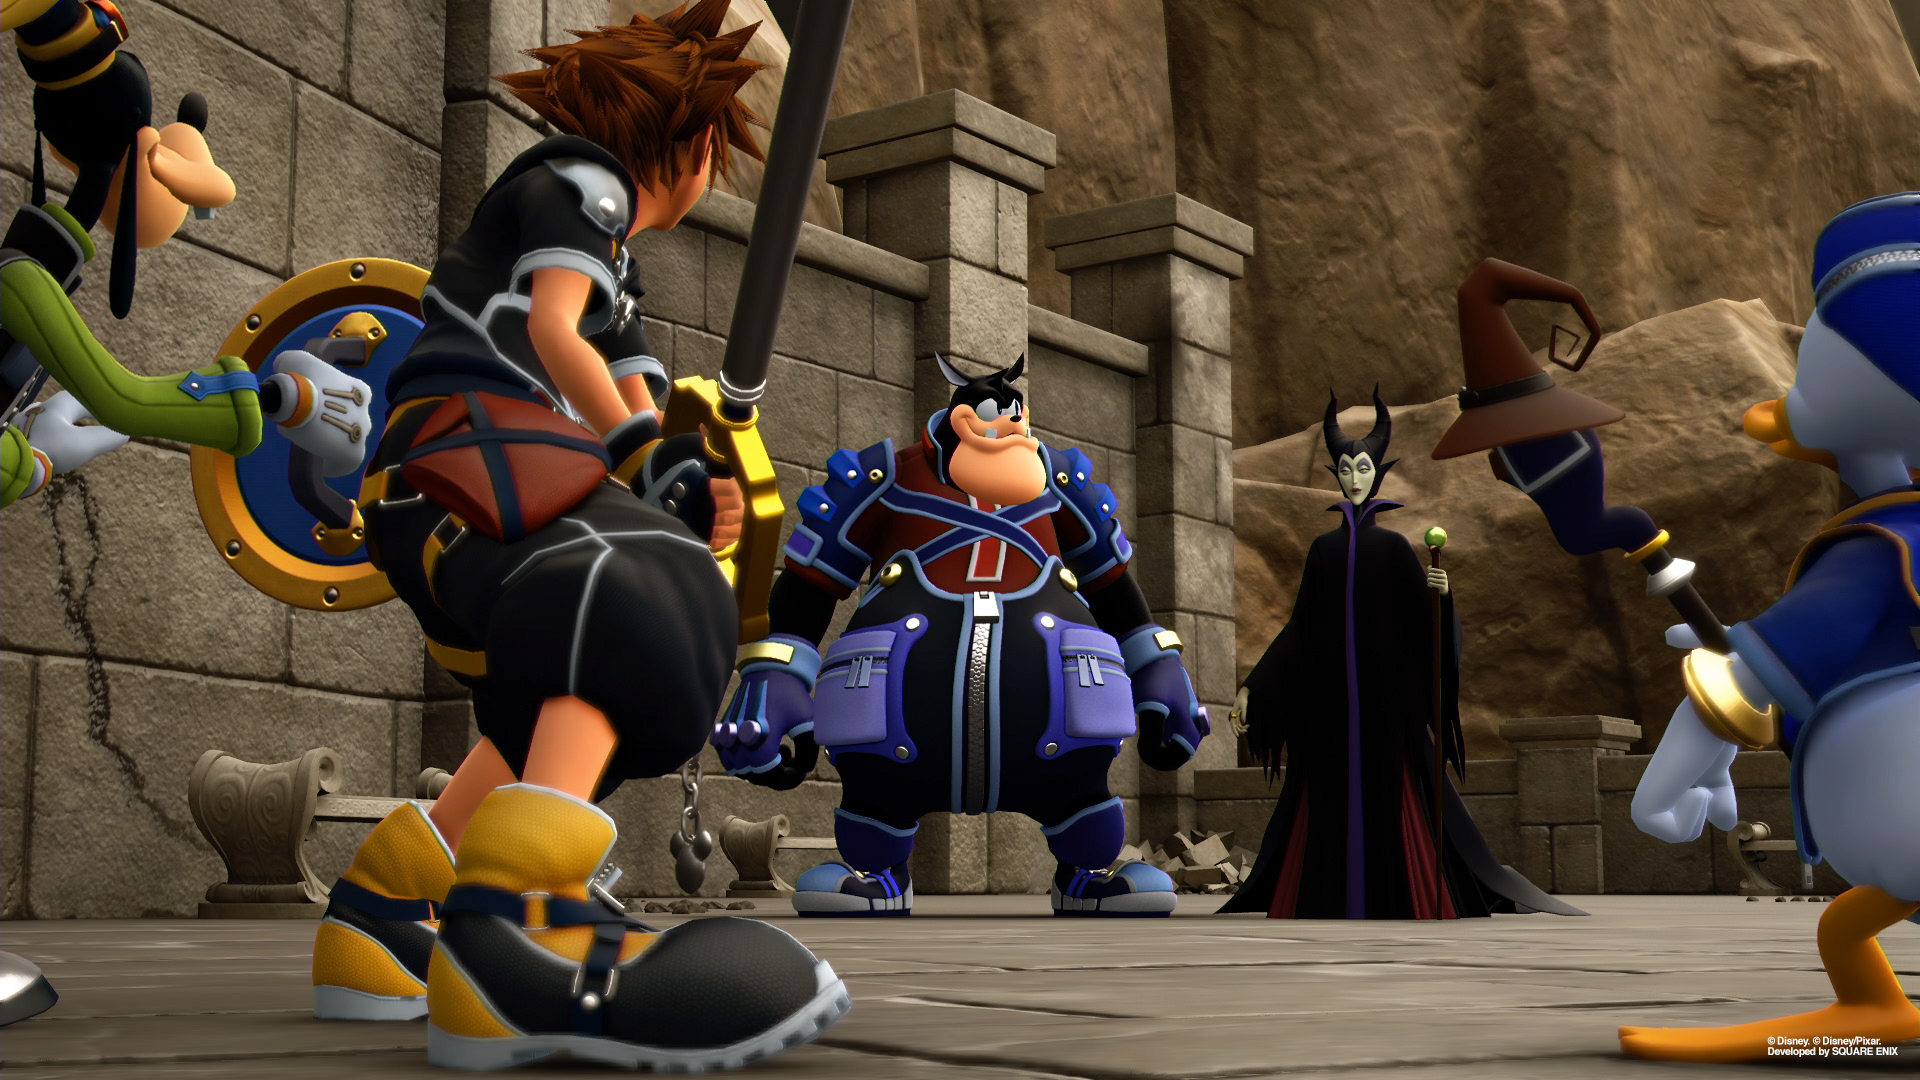 Kingdom Hearts 3: The Most Pointless Review - Gideon's Gaming